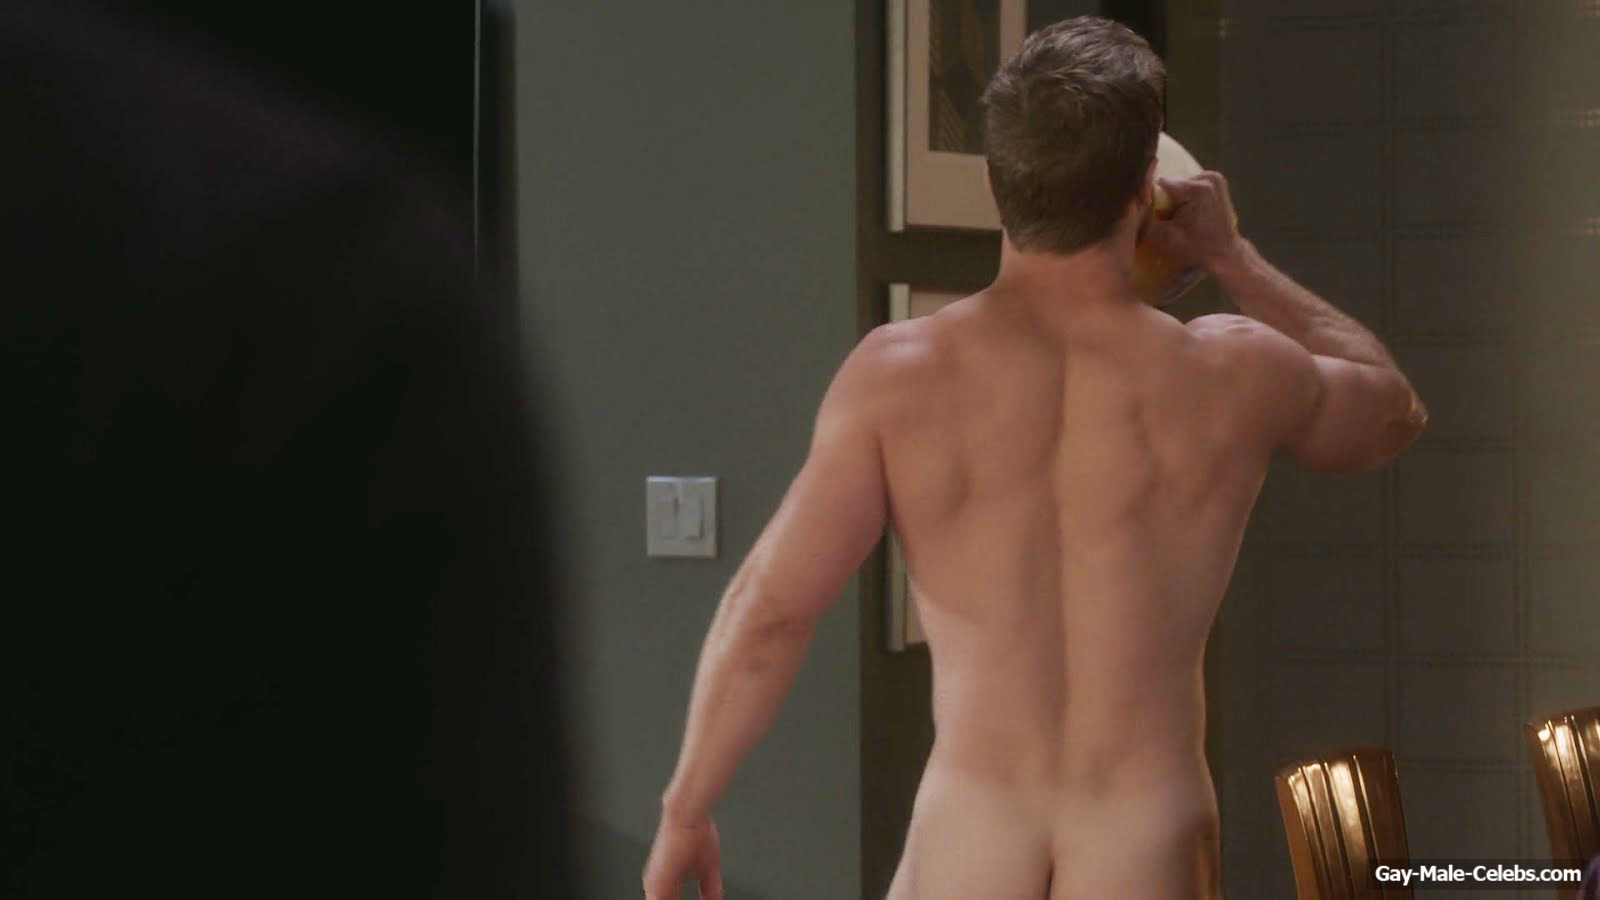 Derek Smith Nude In Series What/If Episode: What Happened